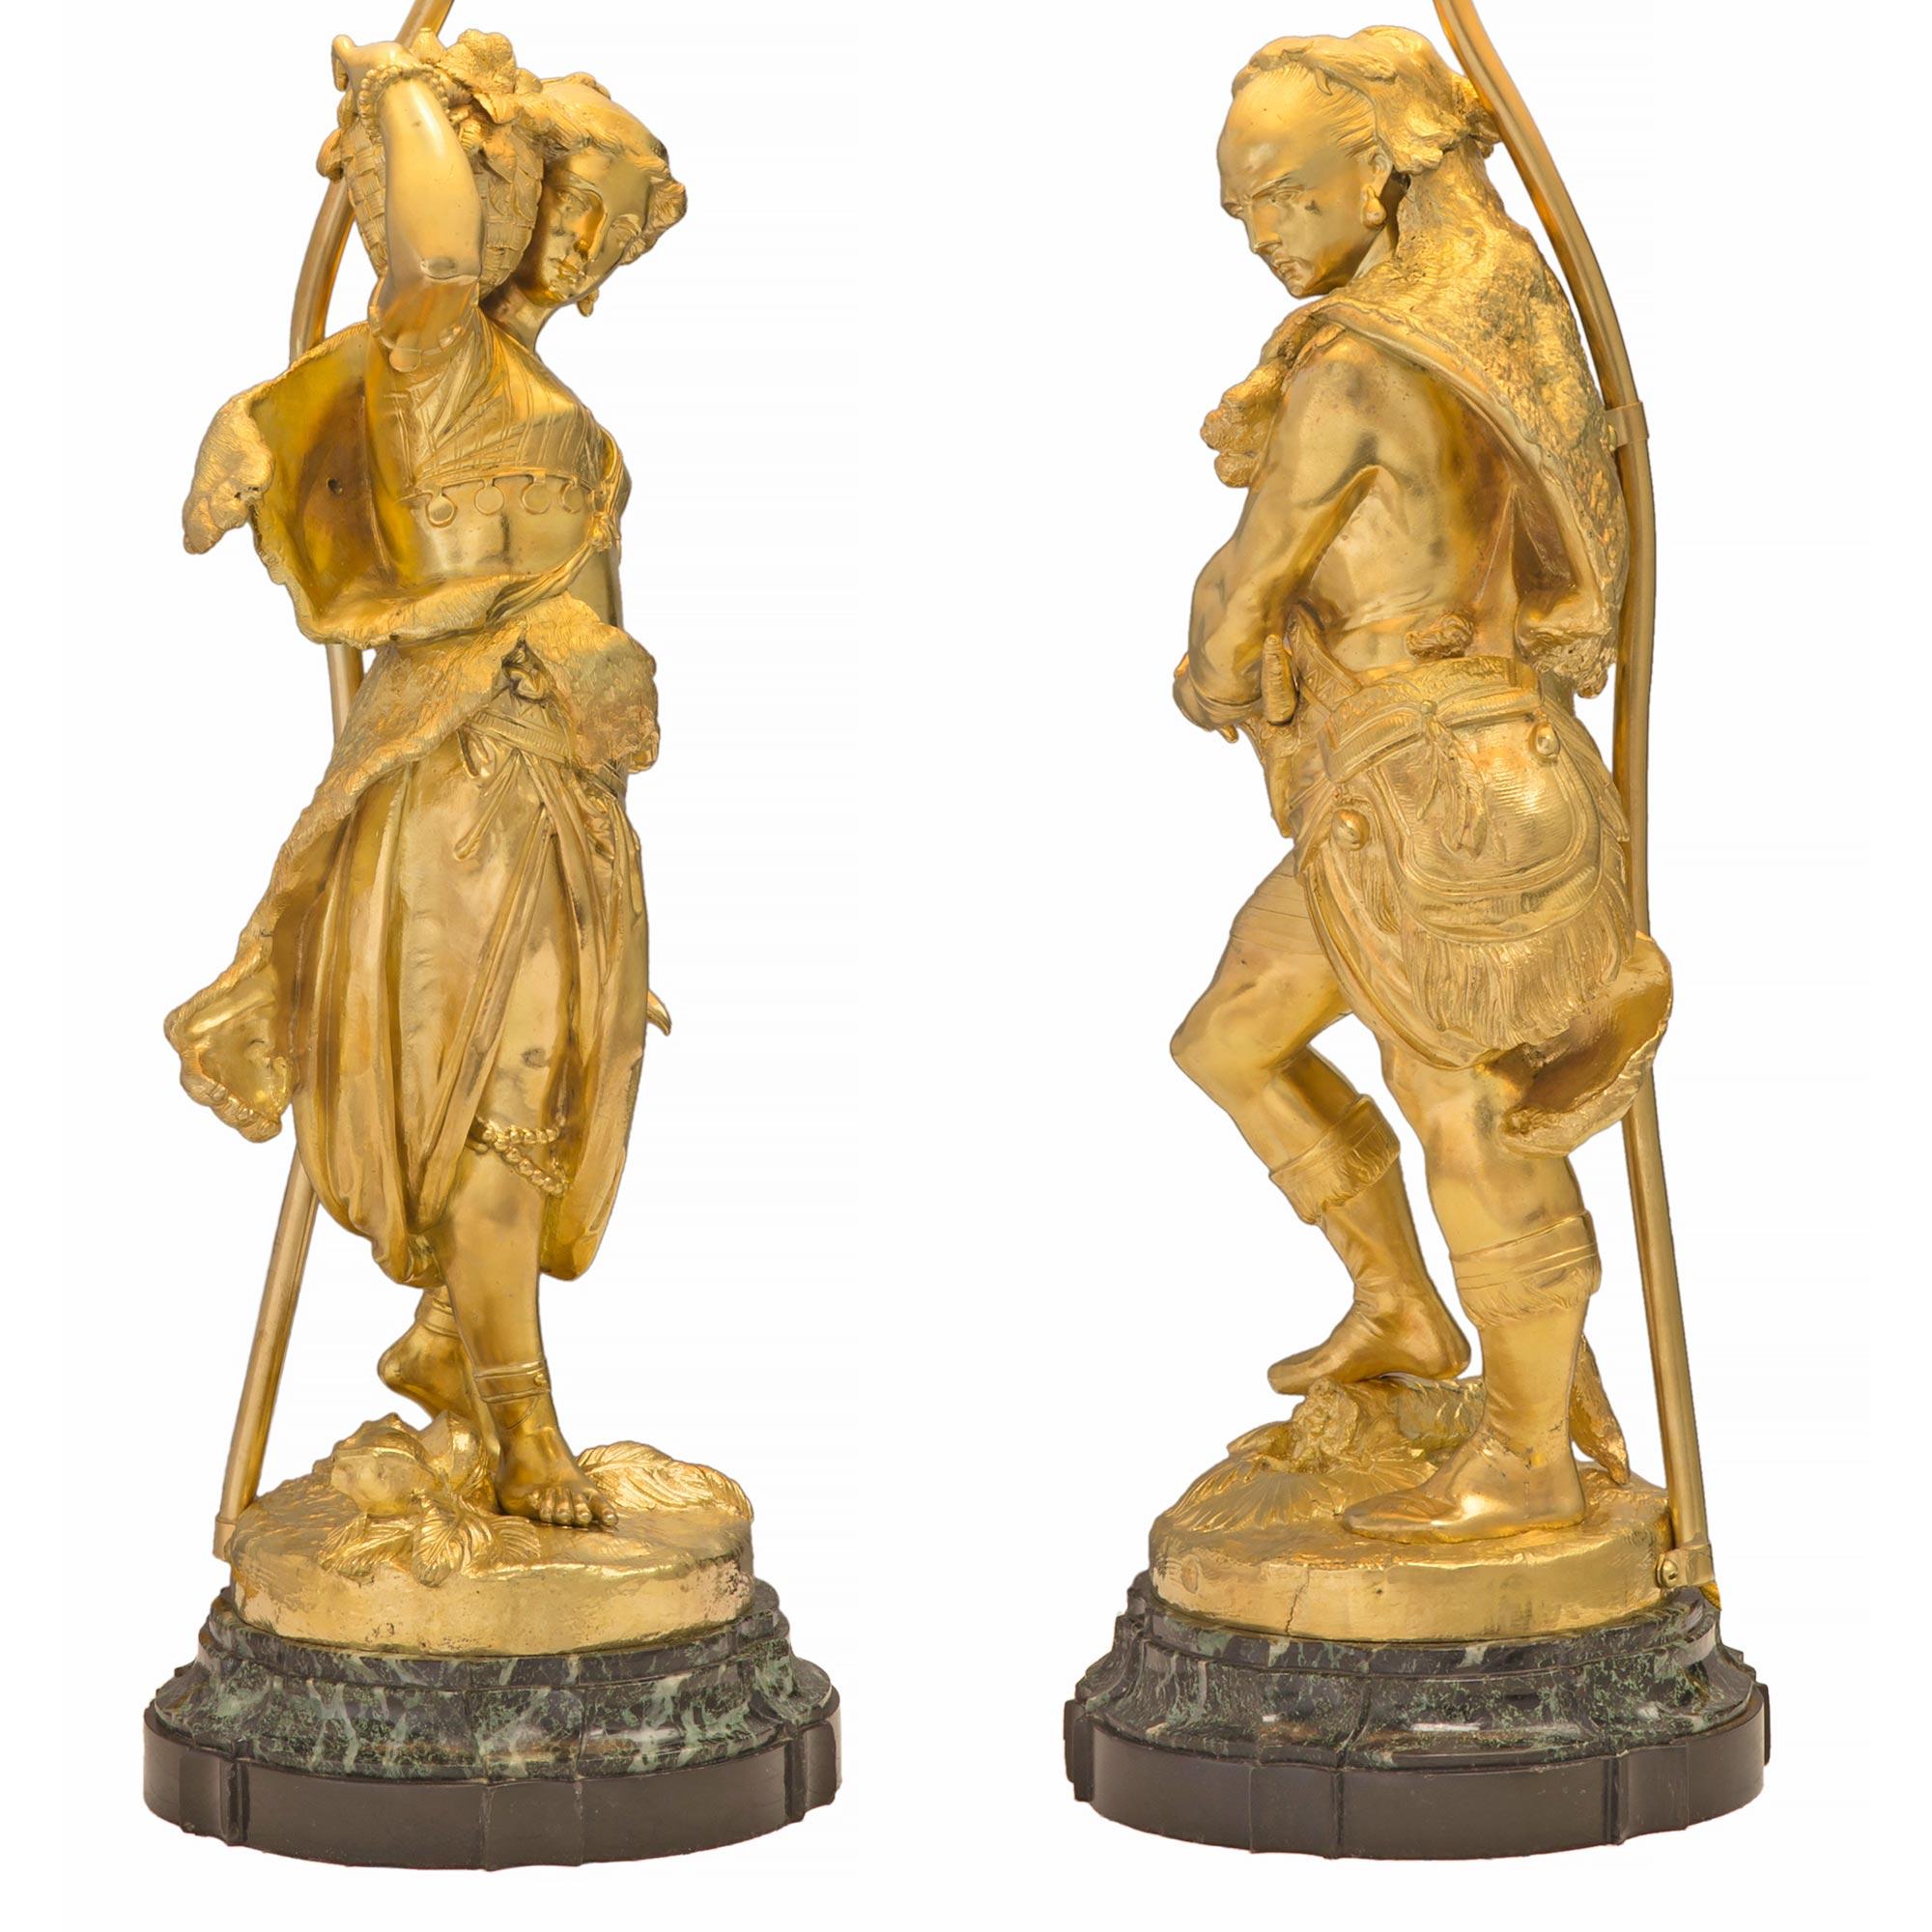 Ormolu Pair of French 19th Century Belle Époque Period Statues Mounted into Lamps For Sale